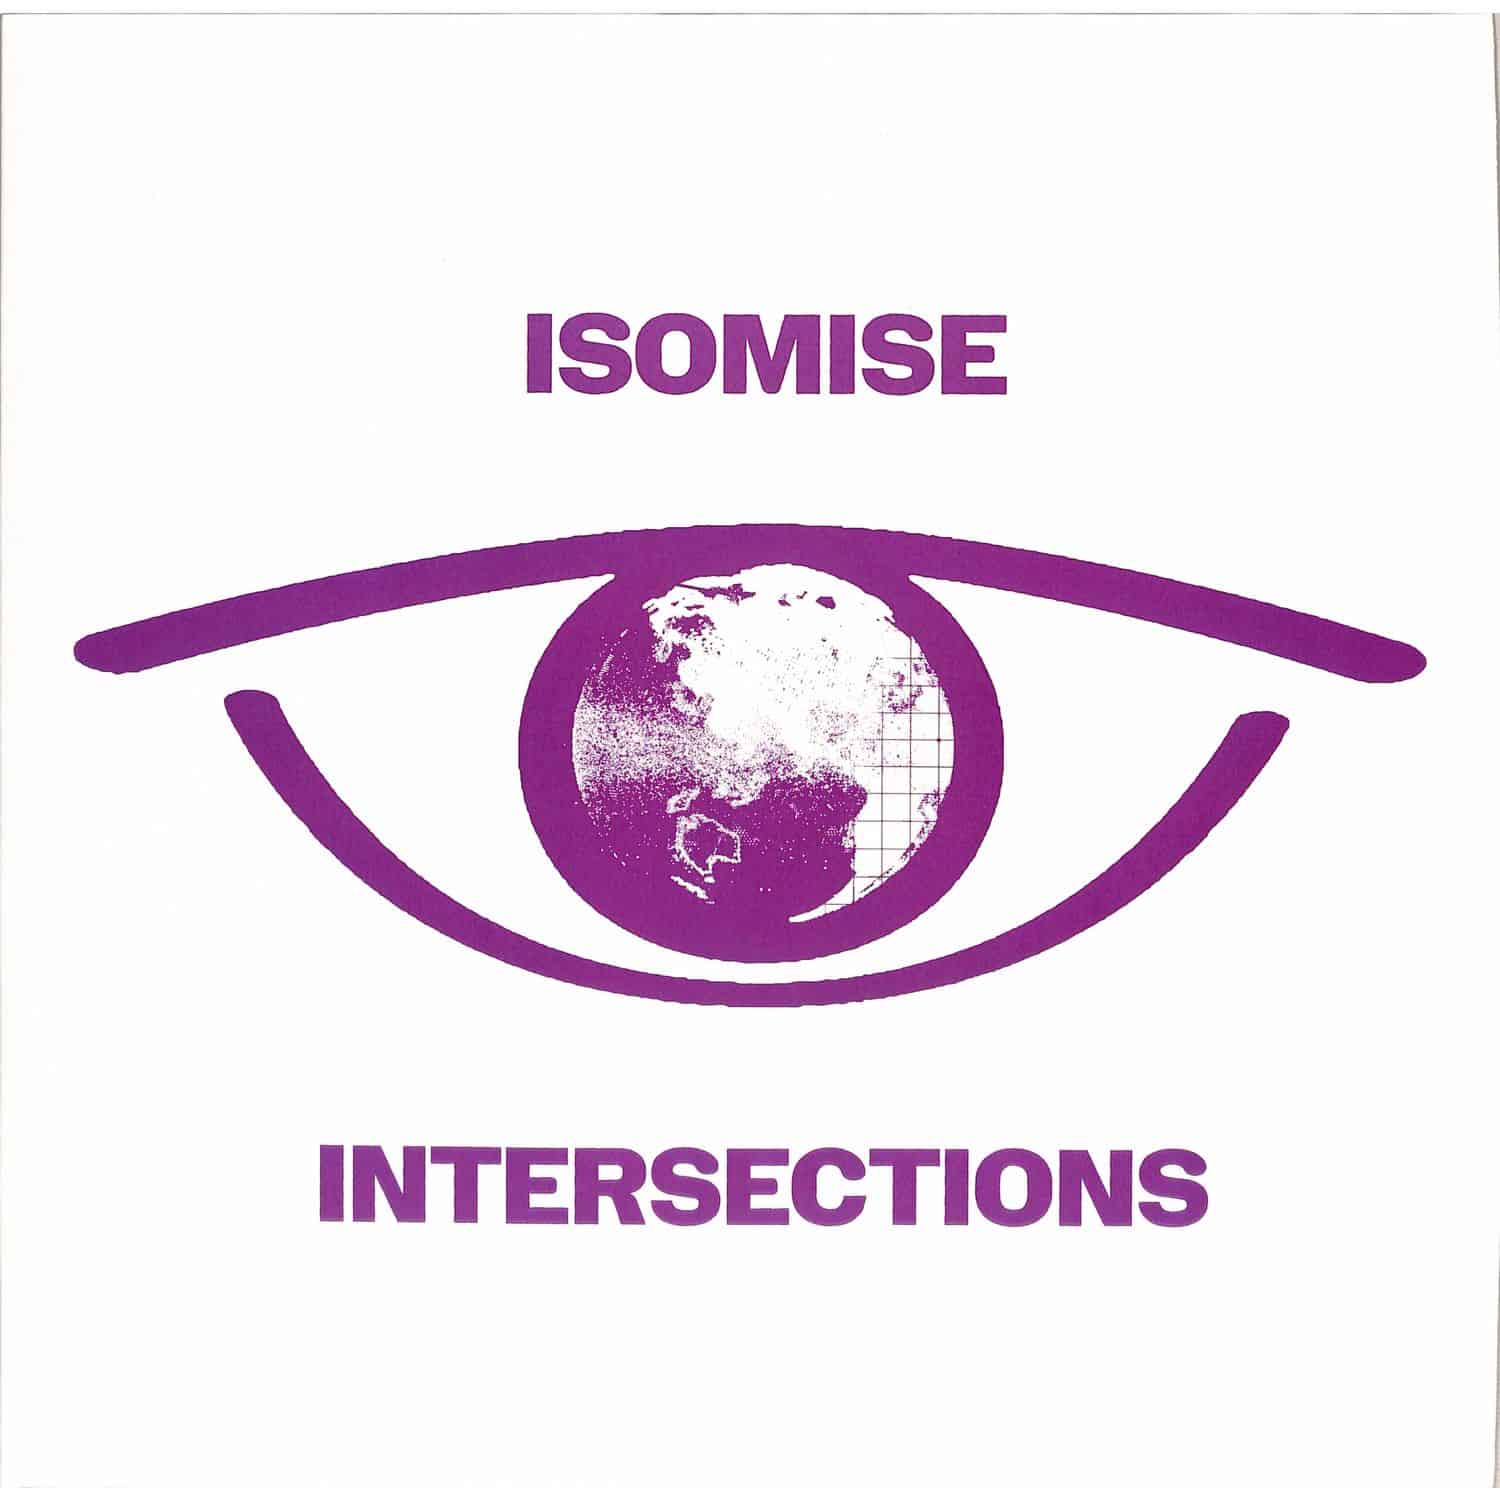 Isomise - INTERSECTIONS